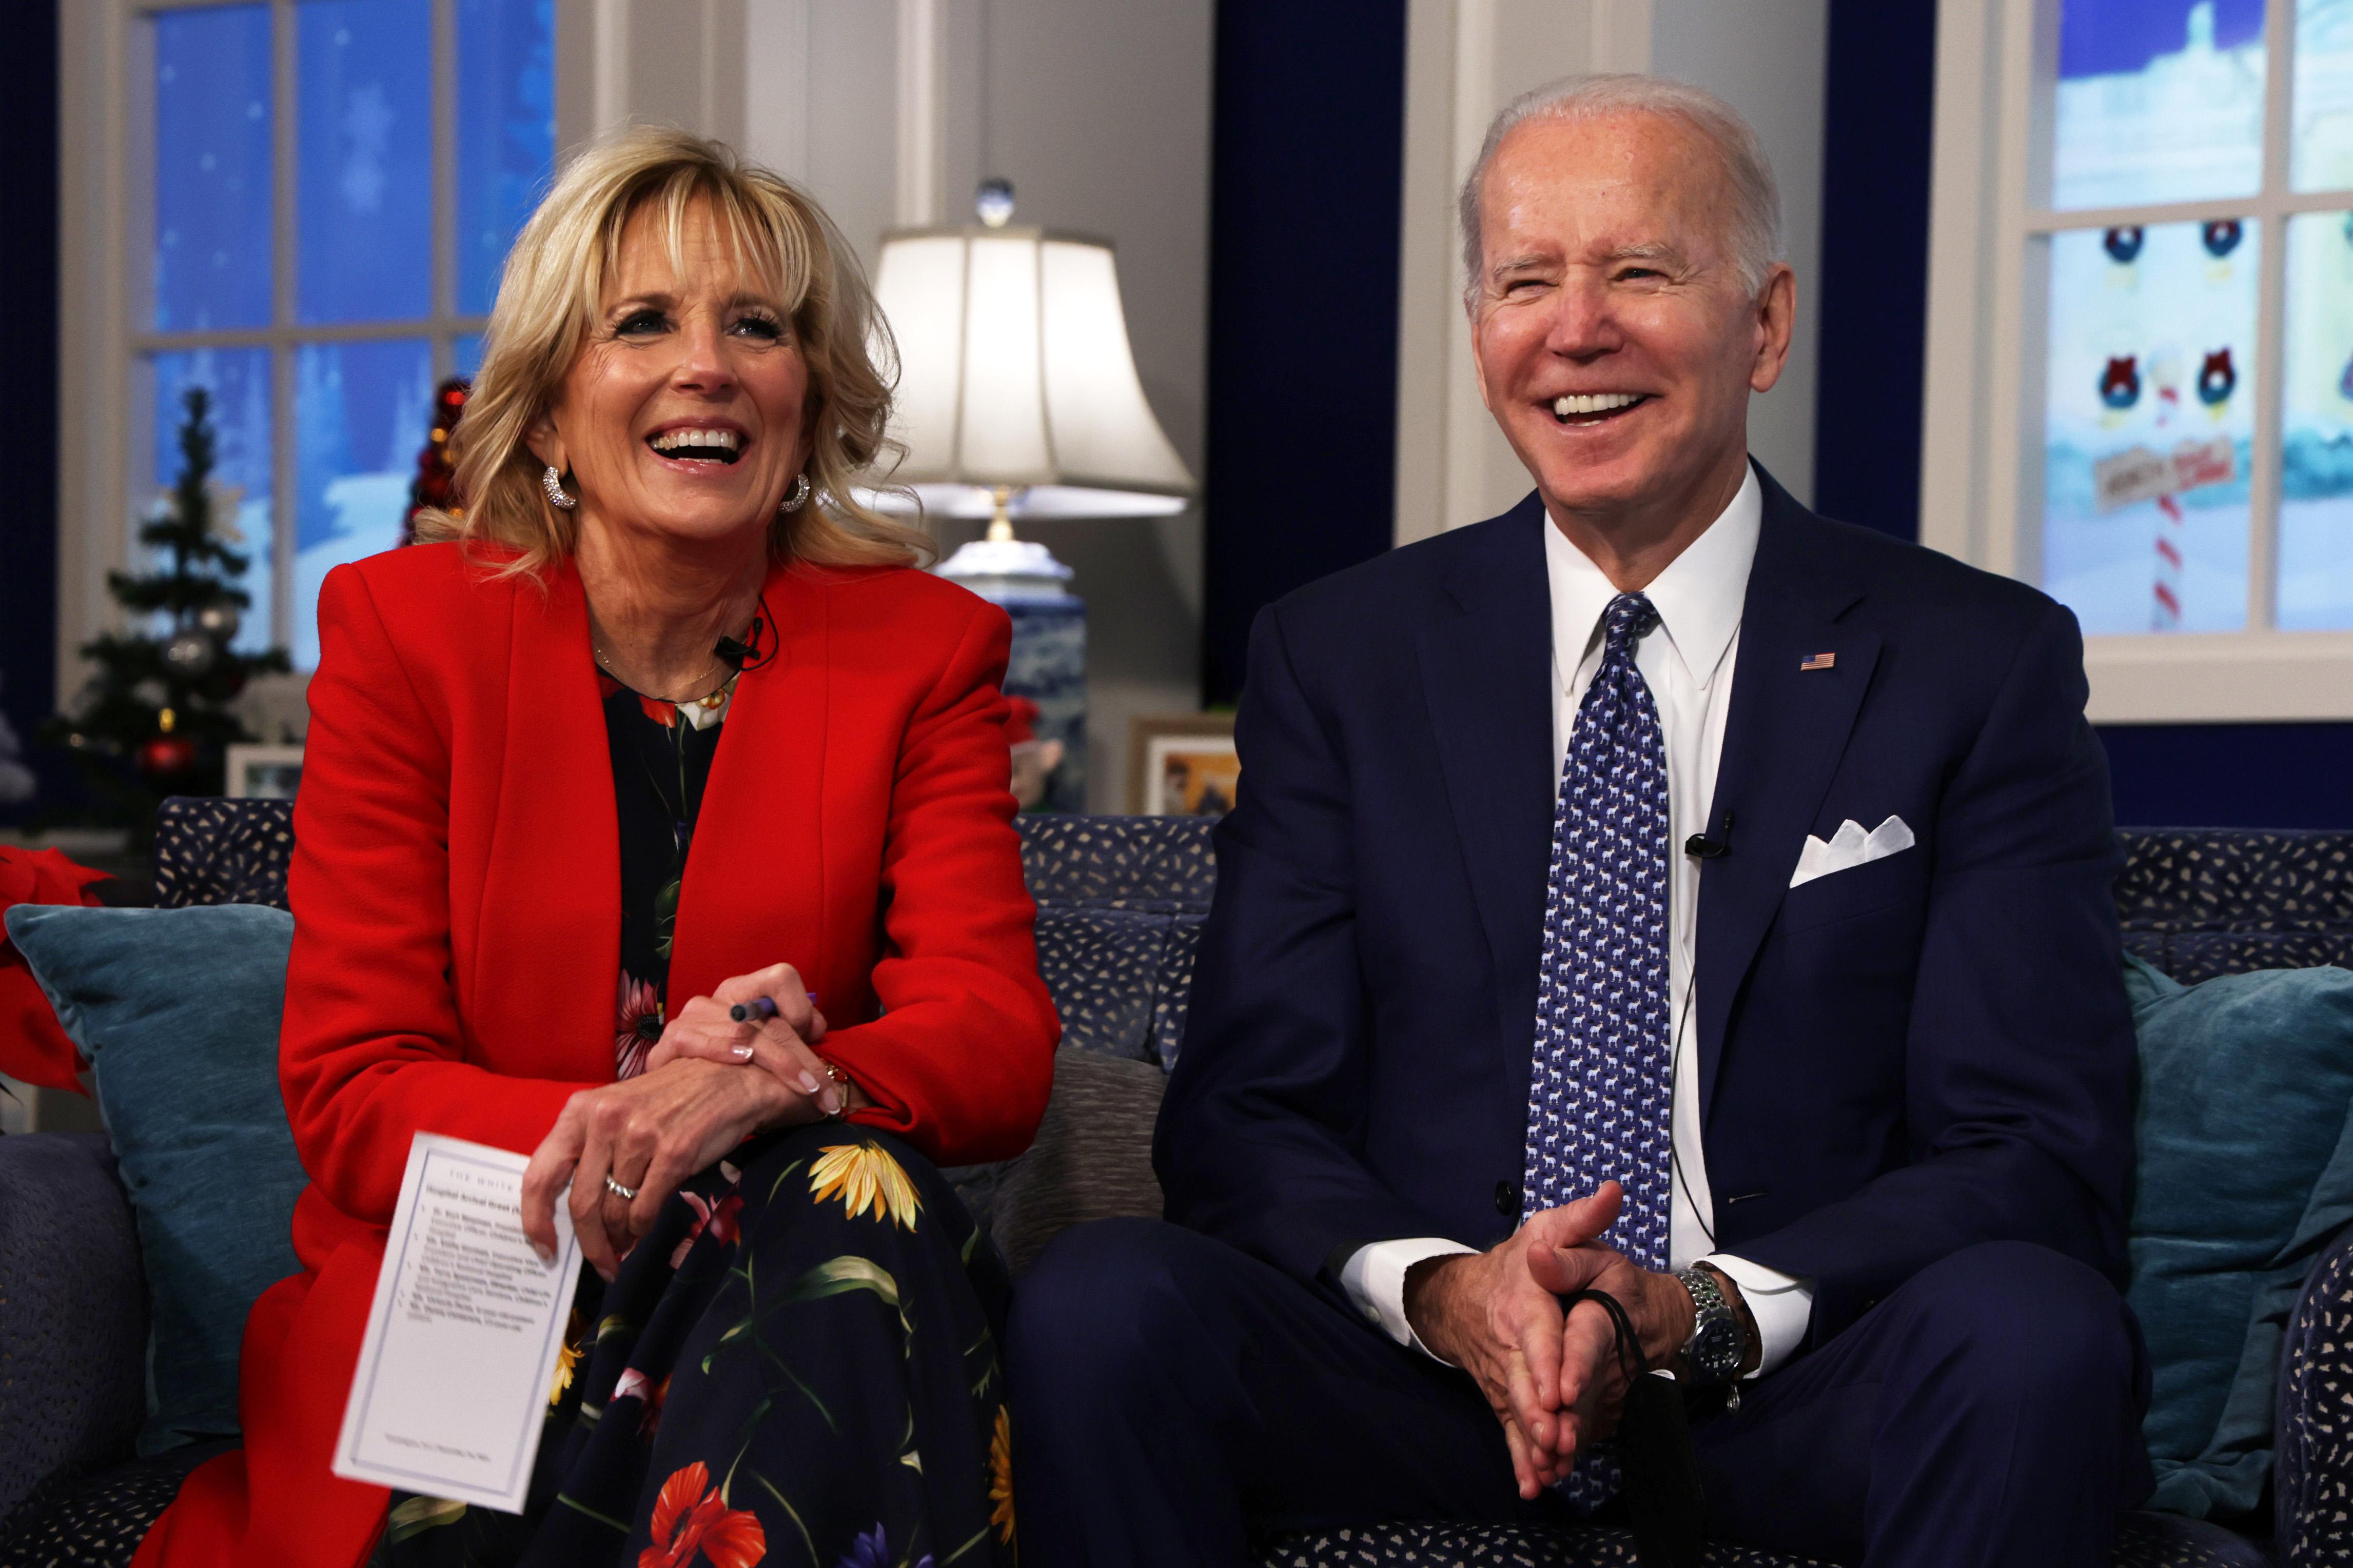 Jill and Joe Biden sitting on a couch smiling broadly